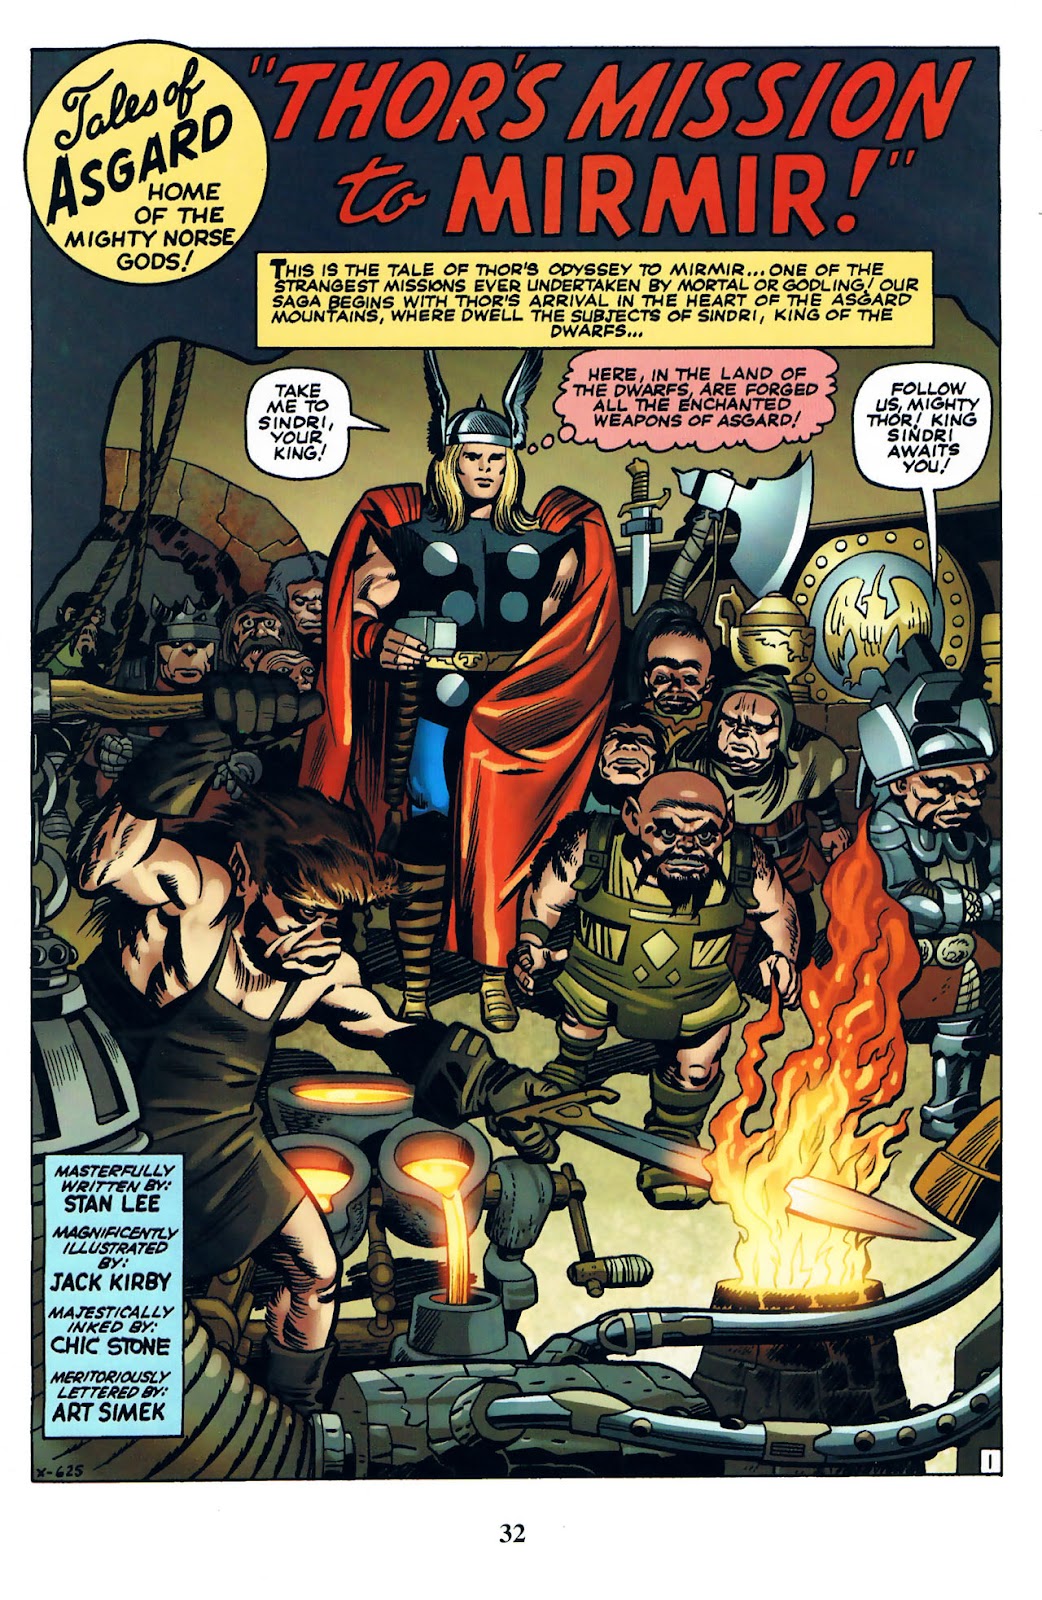 Thor: Tales of Asgard by Stan Lee & Jack Kirby issue 1 - Page 34